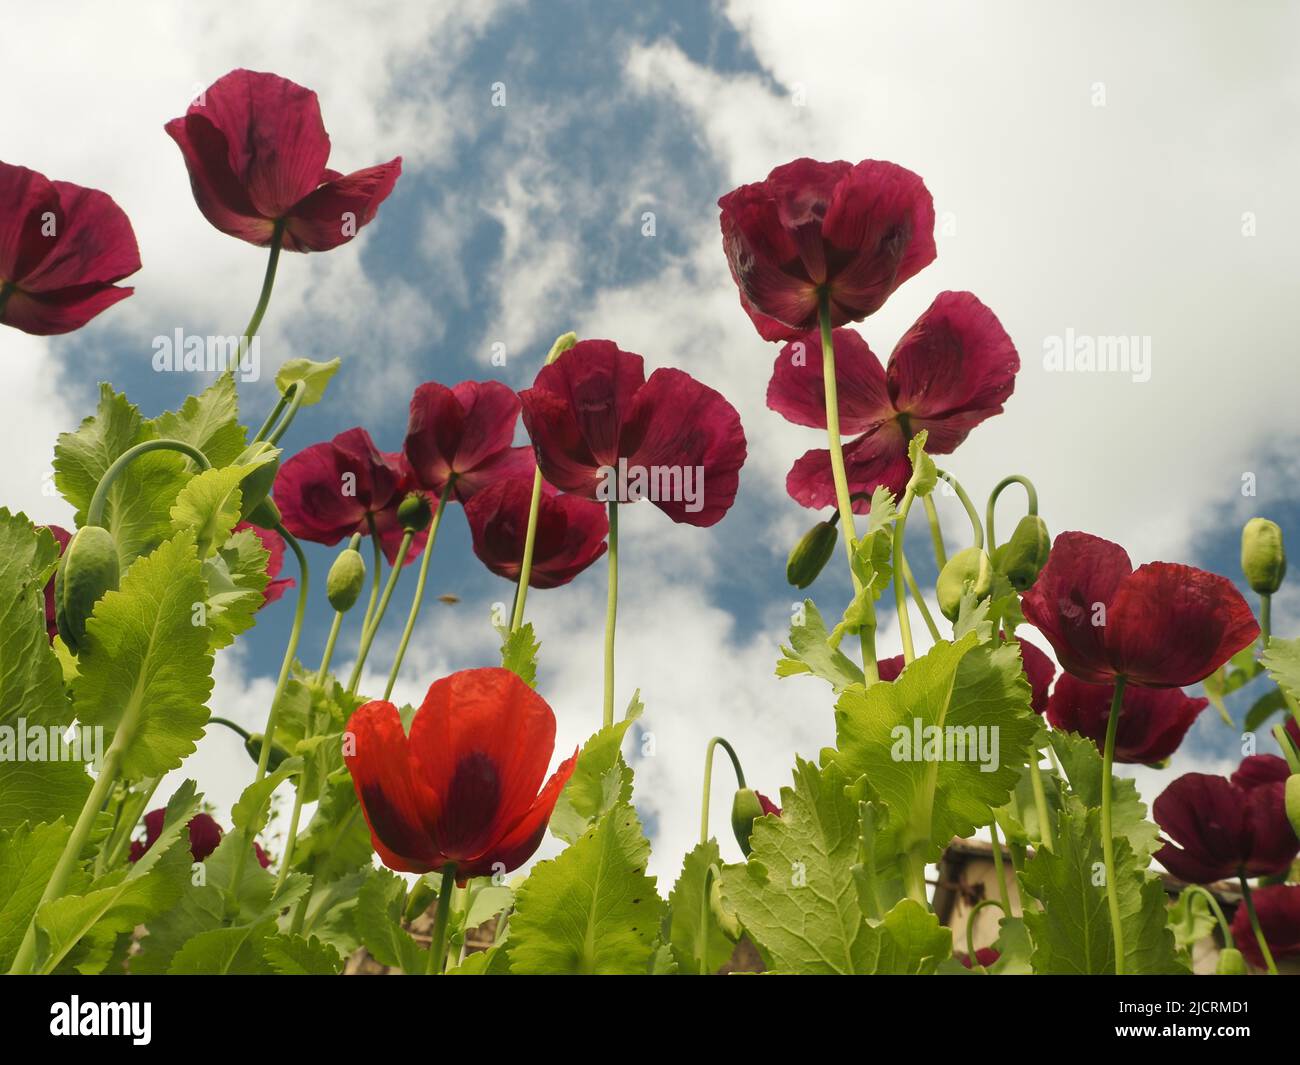 Plum, scarlet or purple coloured Oriental poppies (papaver) which have self seeded in a re-wilded English gardenaganst a blue sky with white clouds. Stock Photo